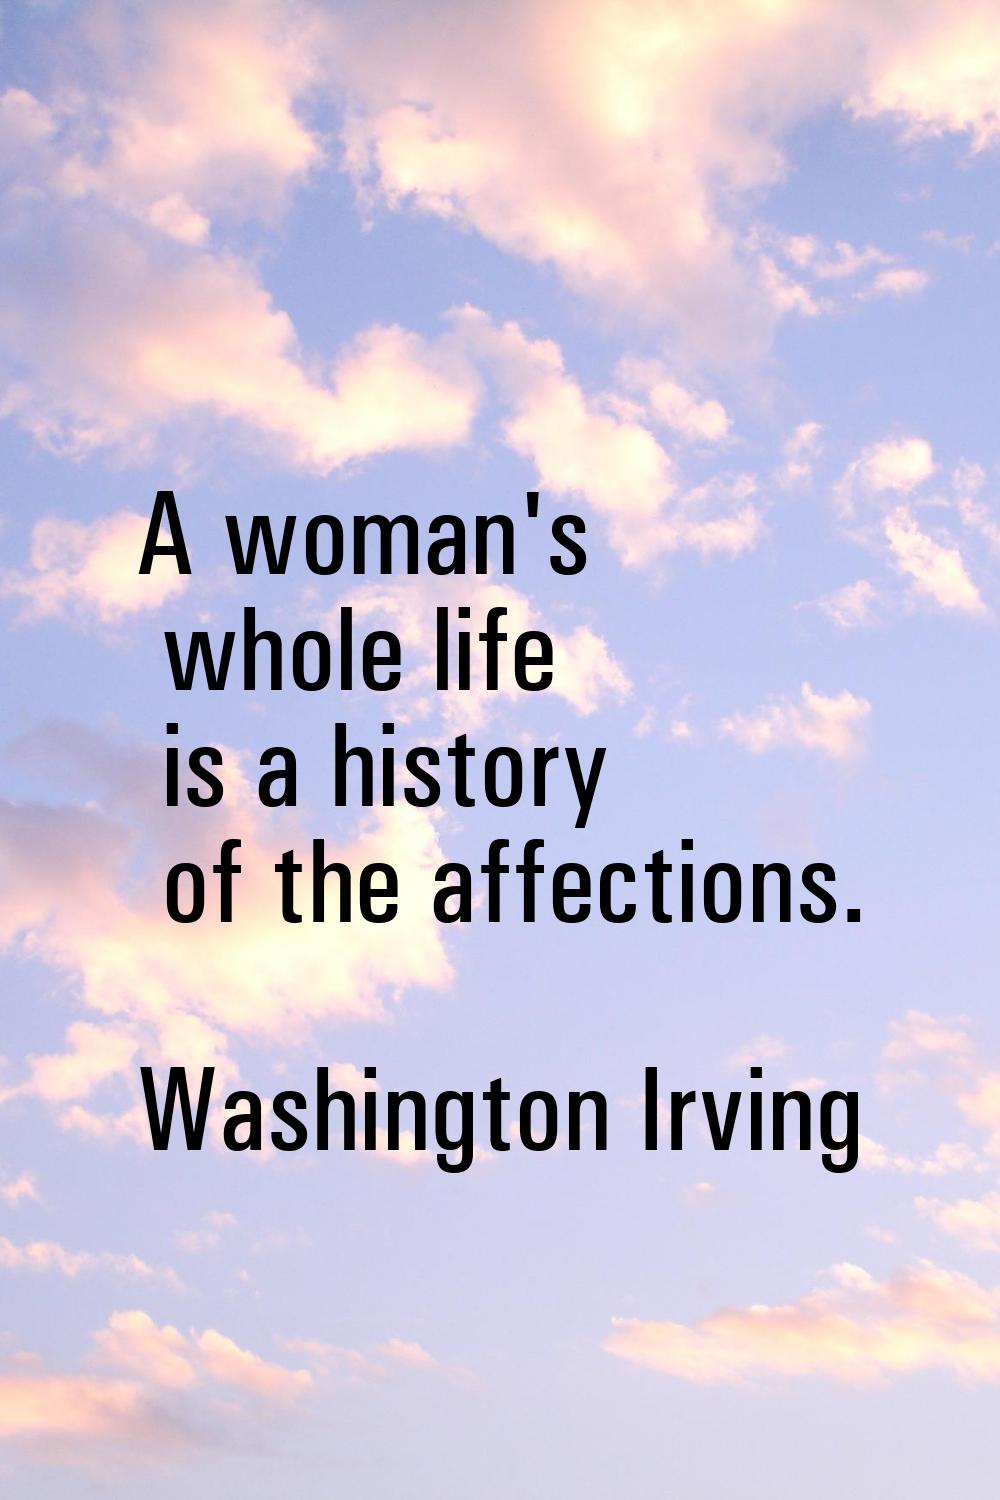 A woman's whole life is a history of the affections.